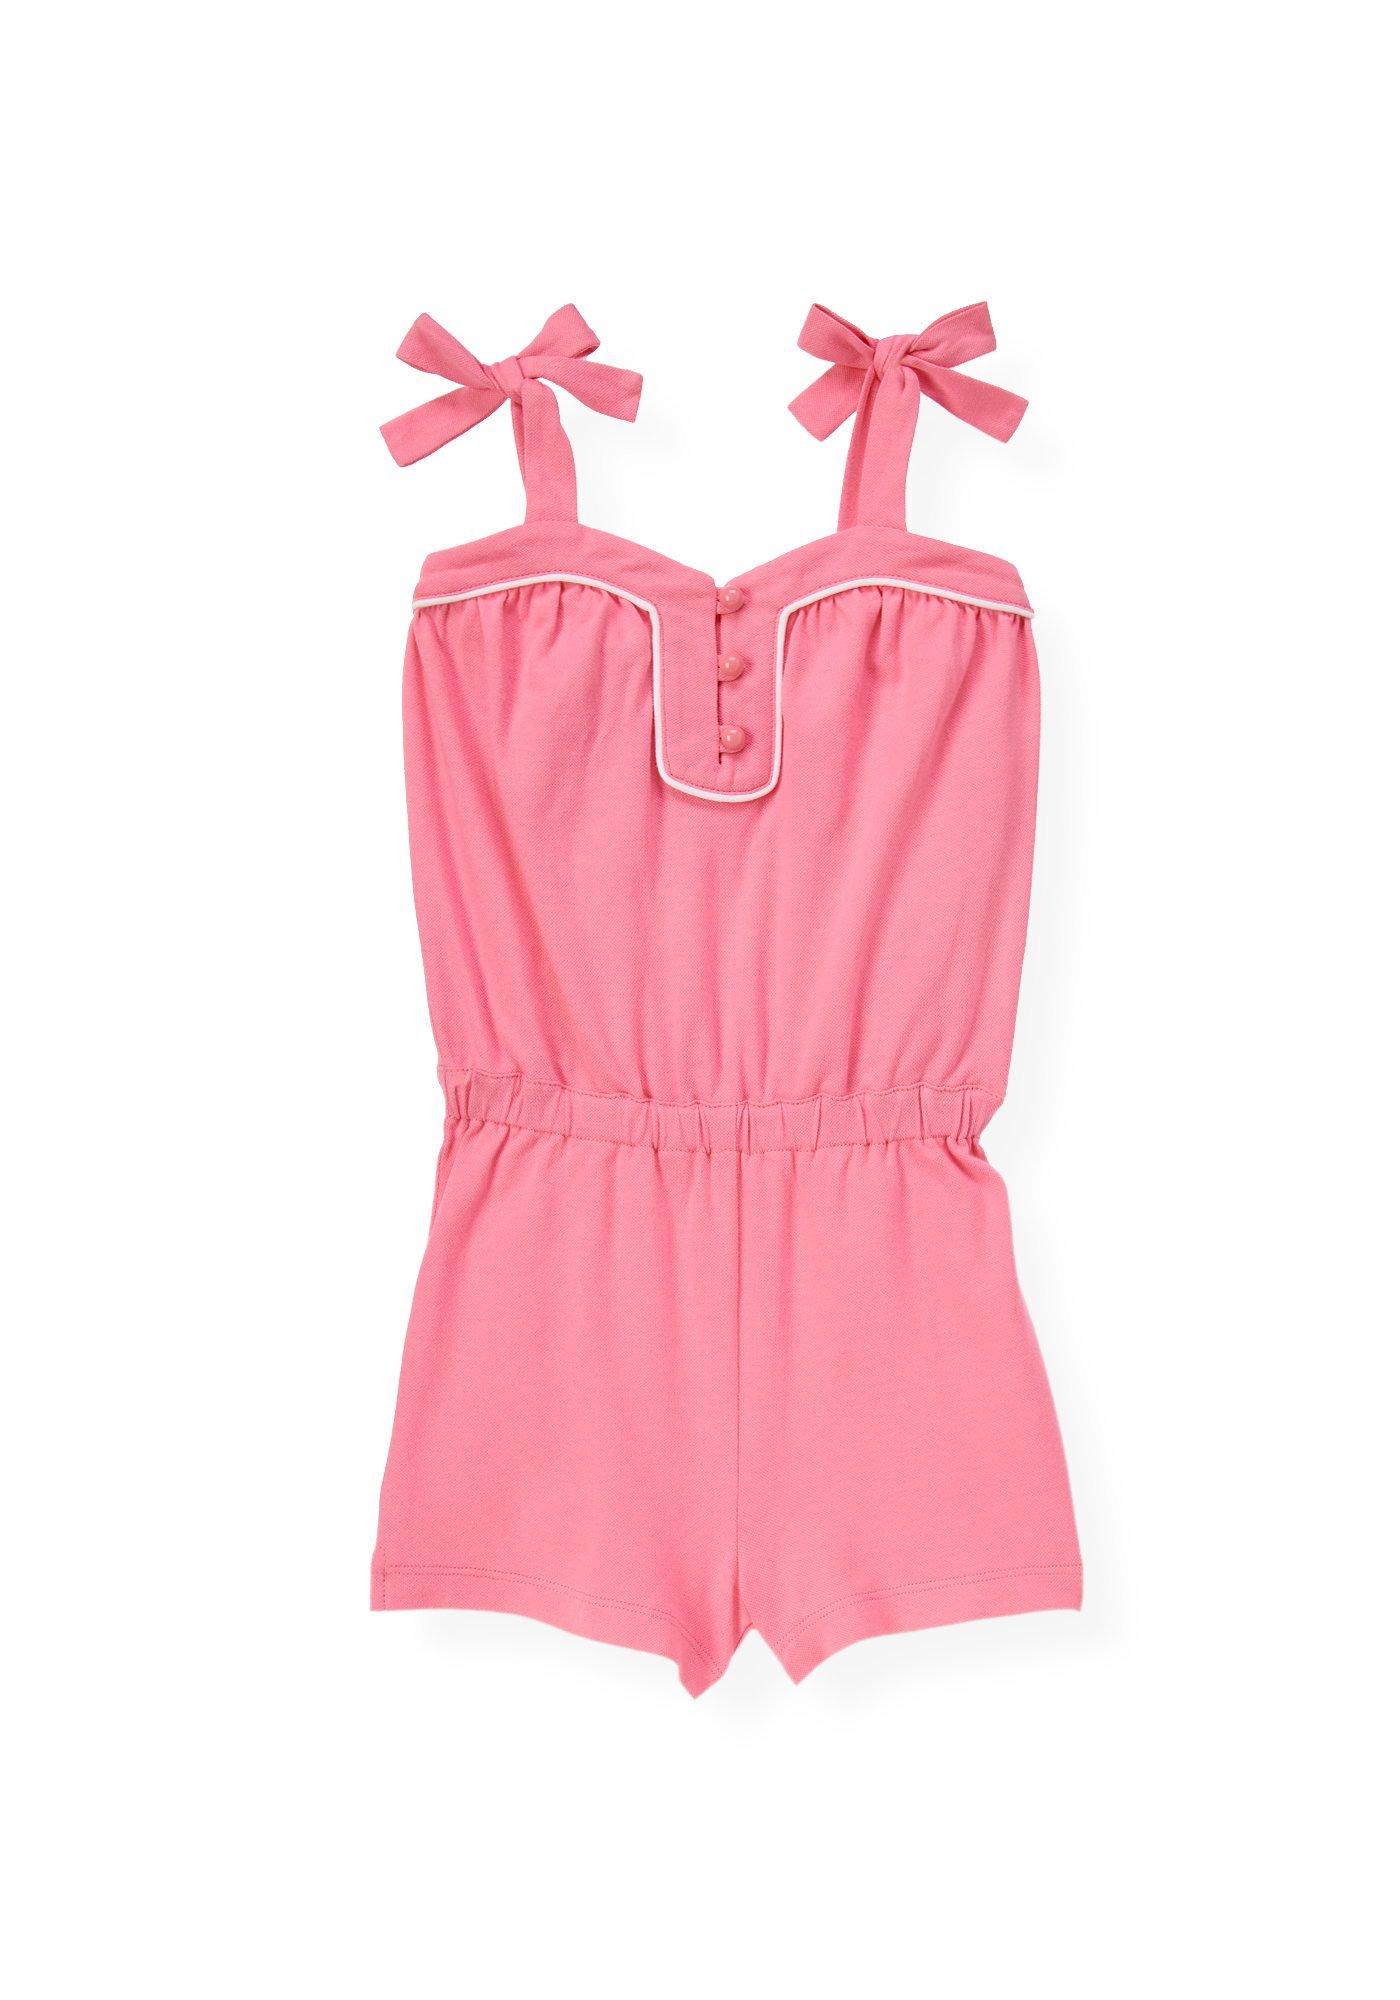 Candy Pink Piped Pique Romper at JanieandJack